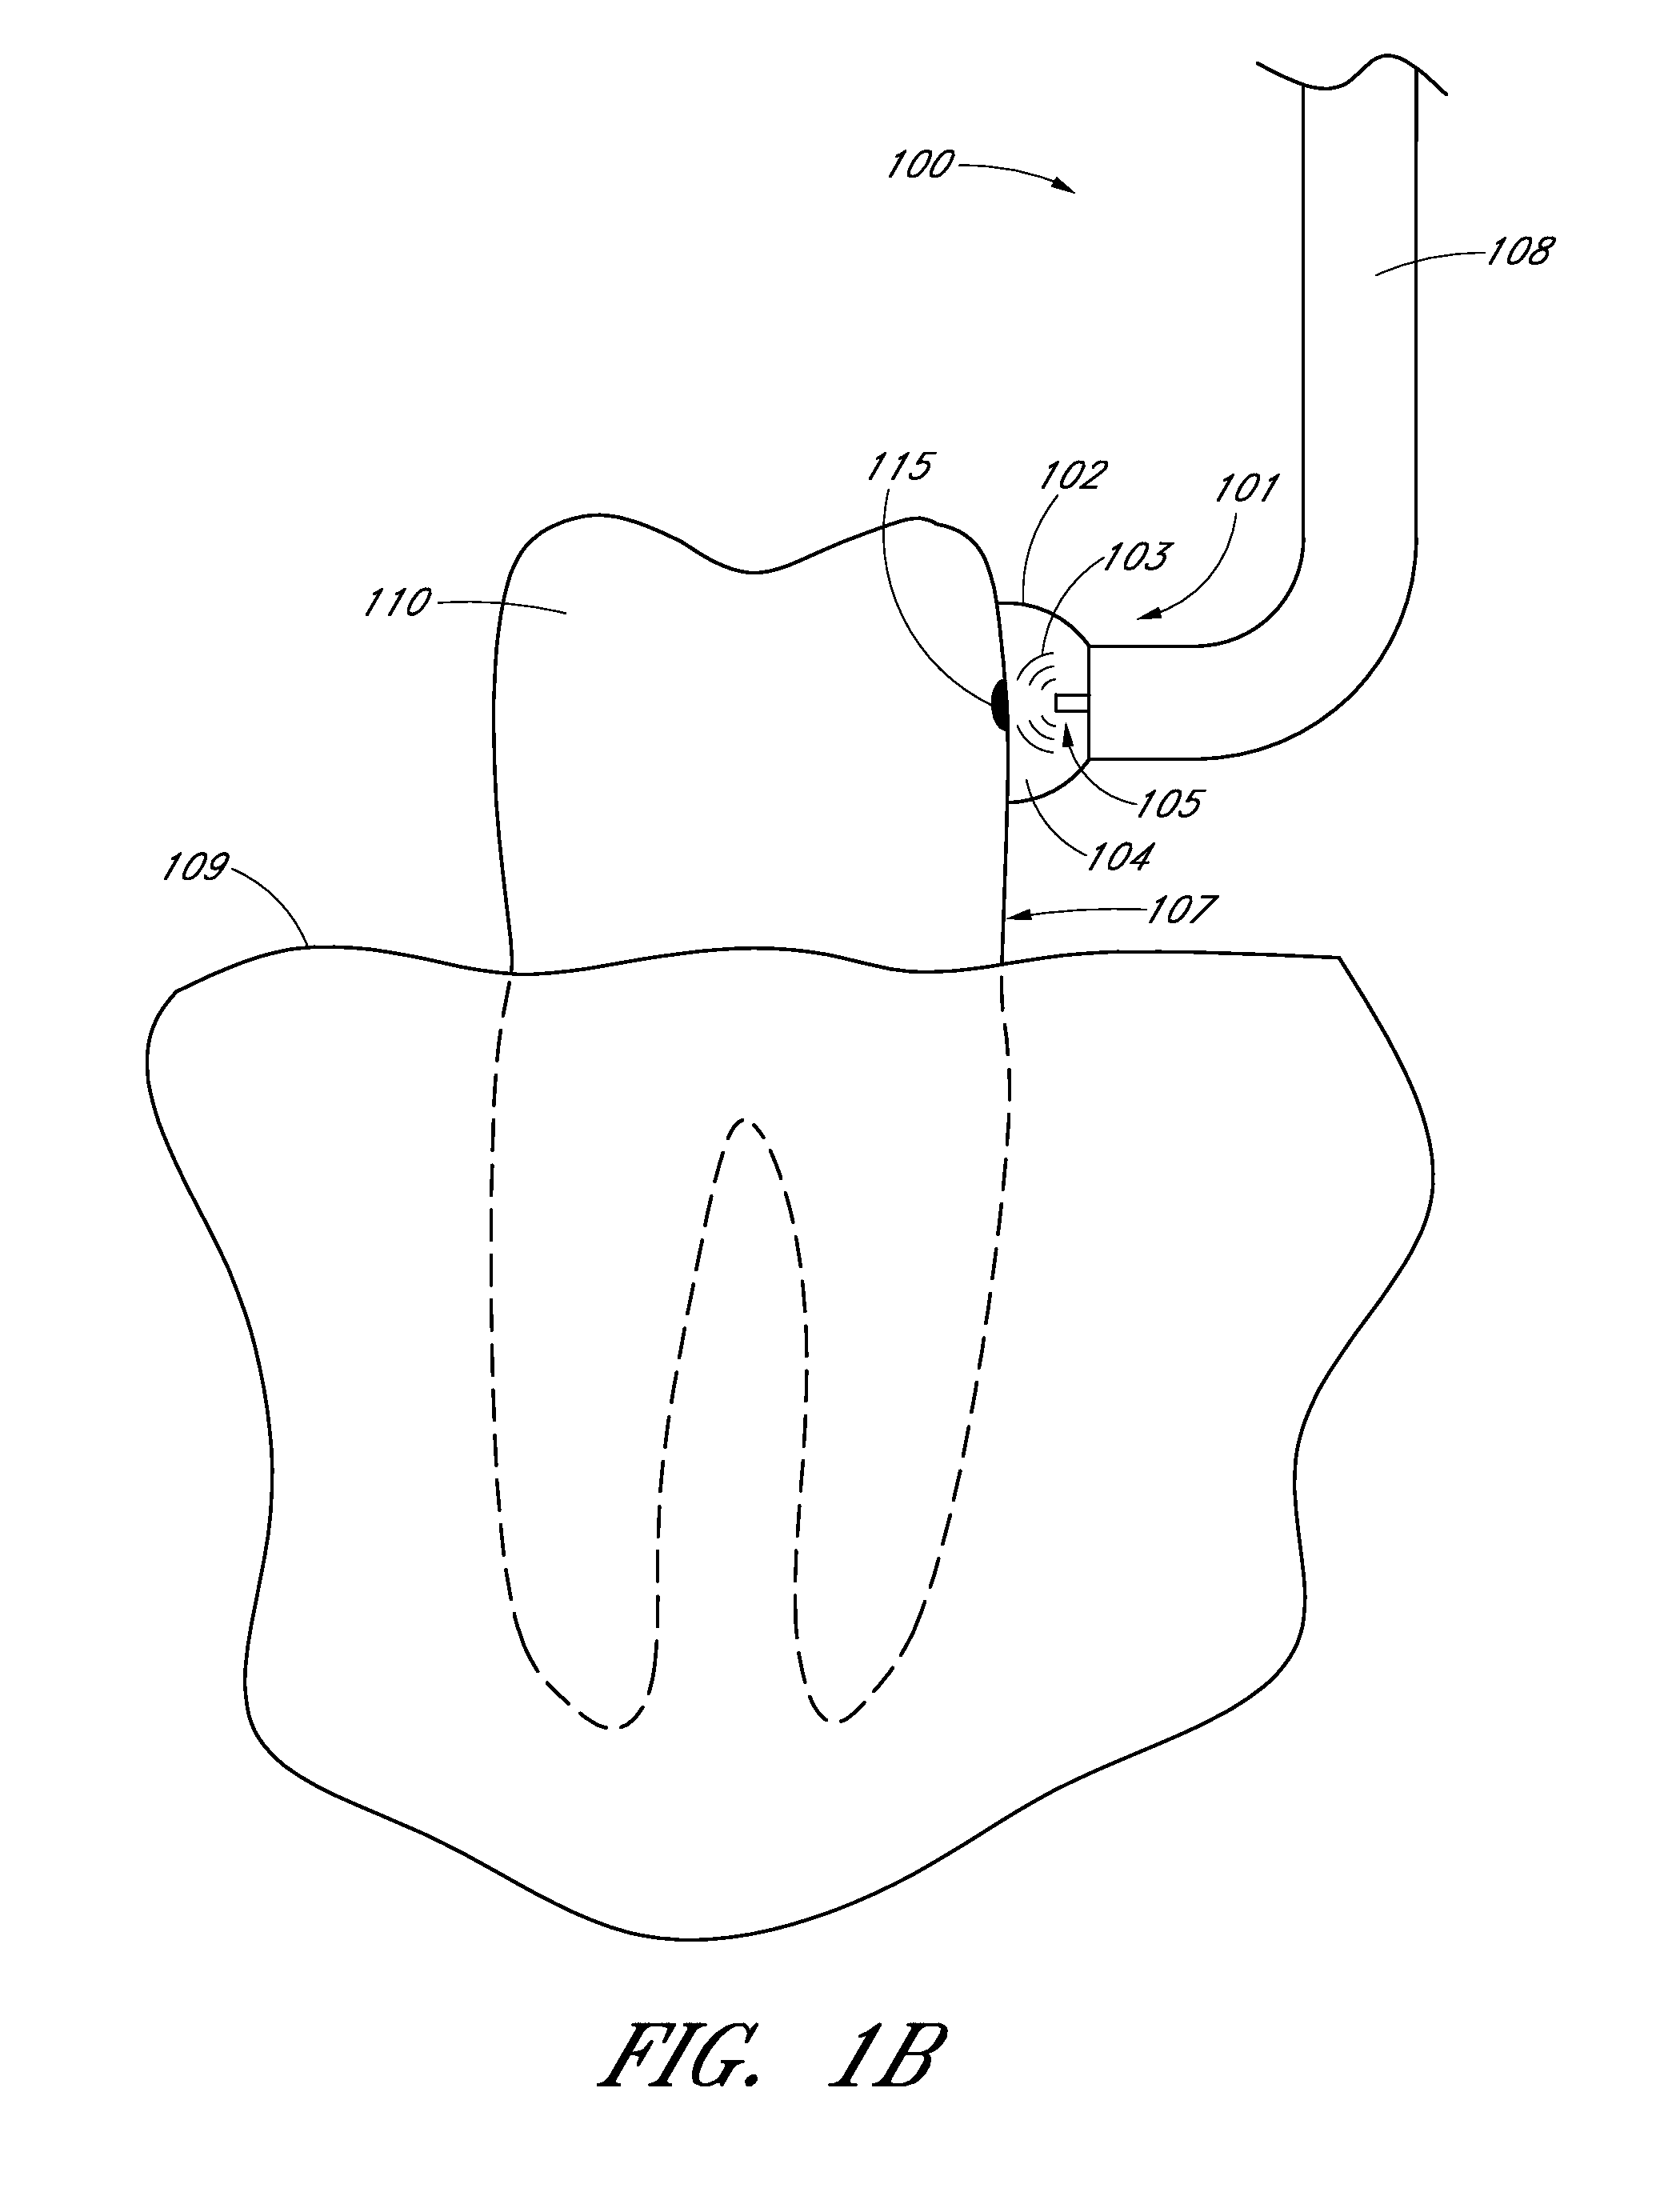 Apparatus and methods for cleaning teeth